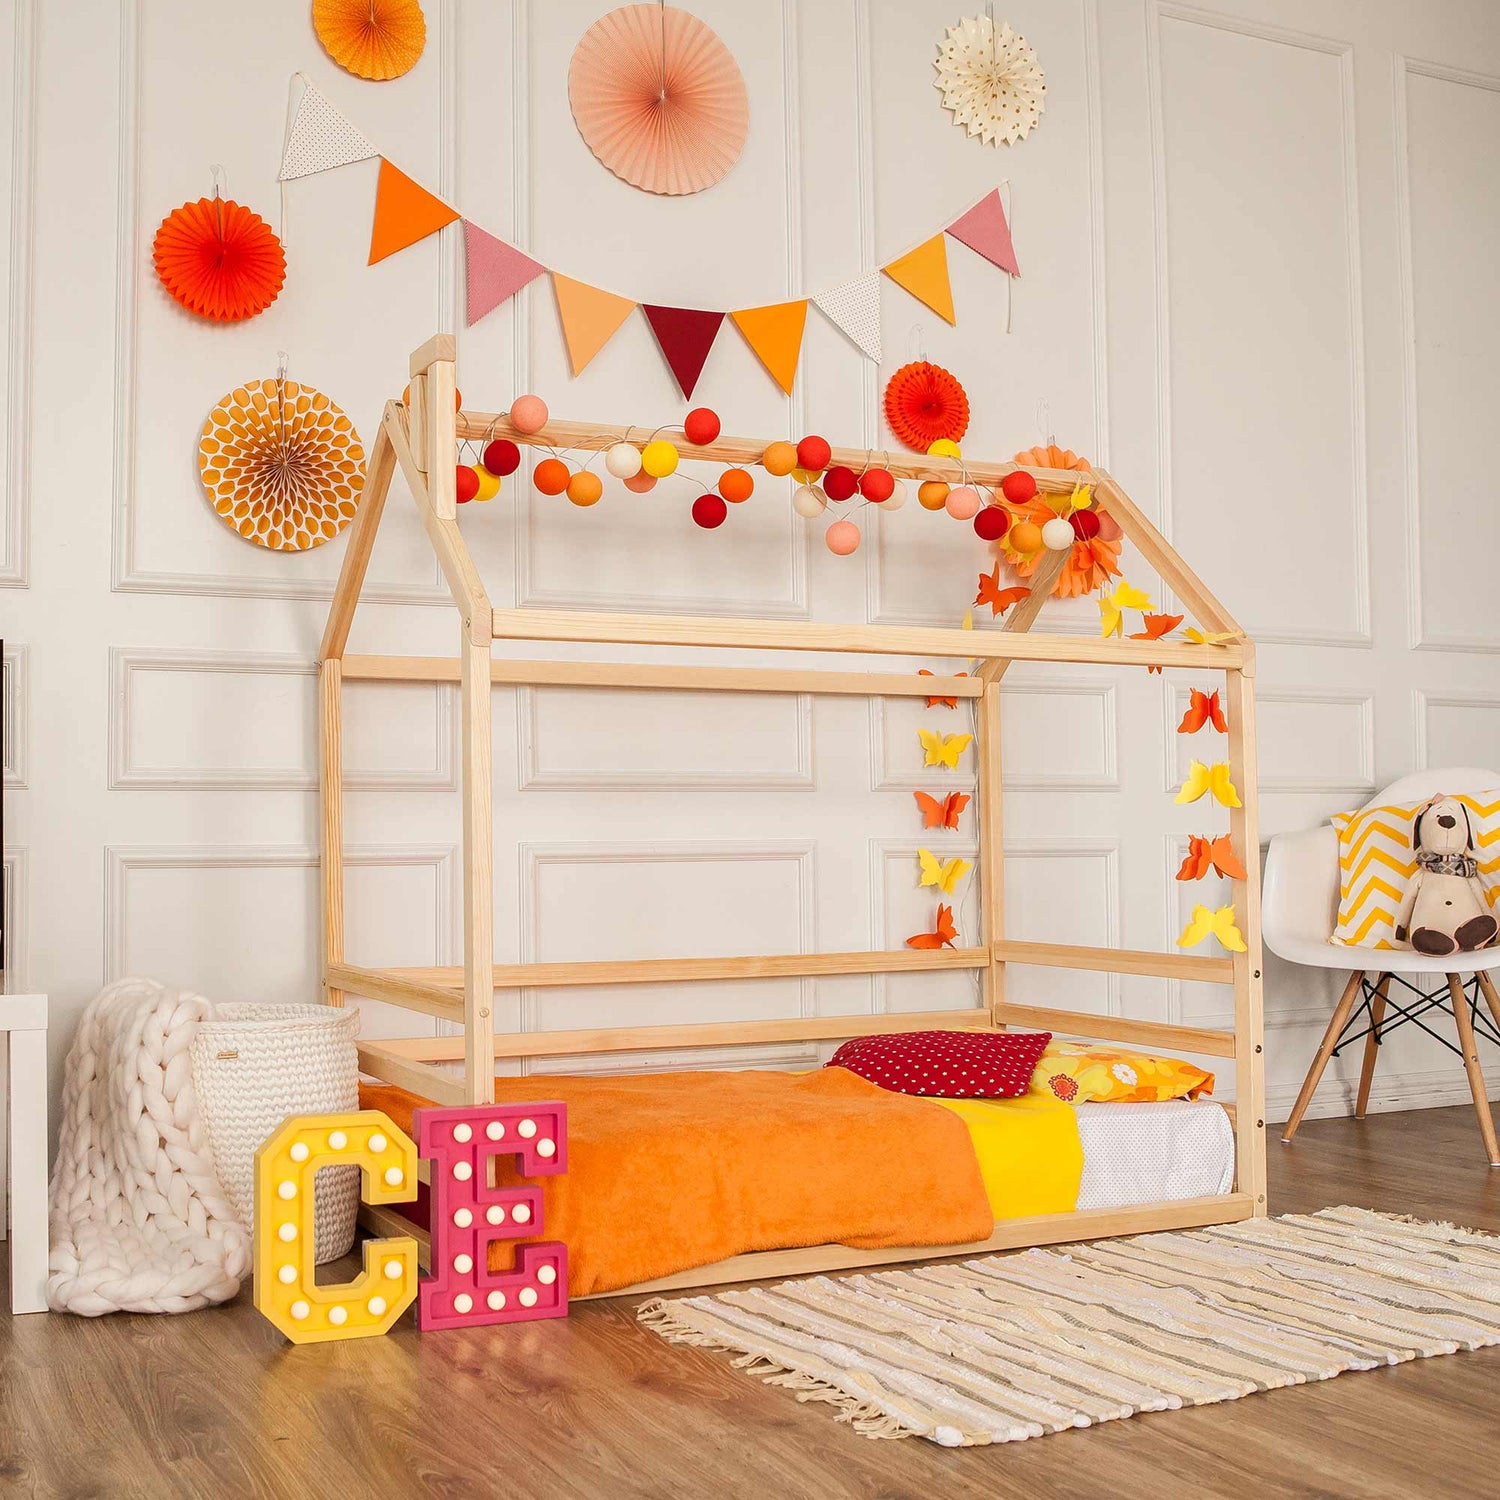 A child's room with a wooden bed and decorations.